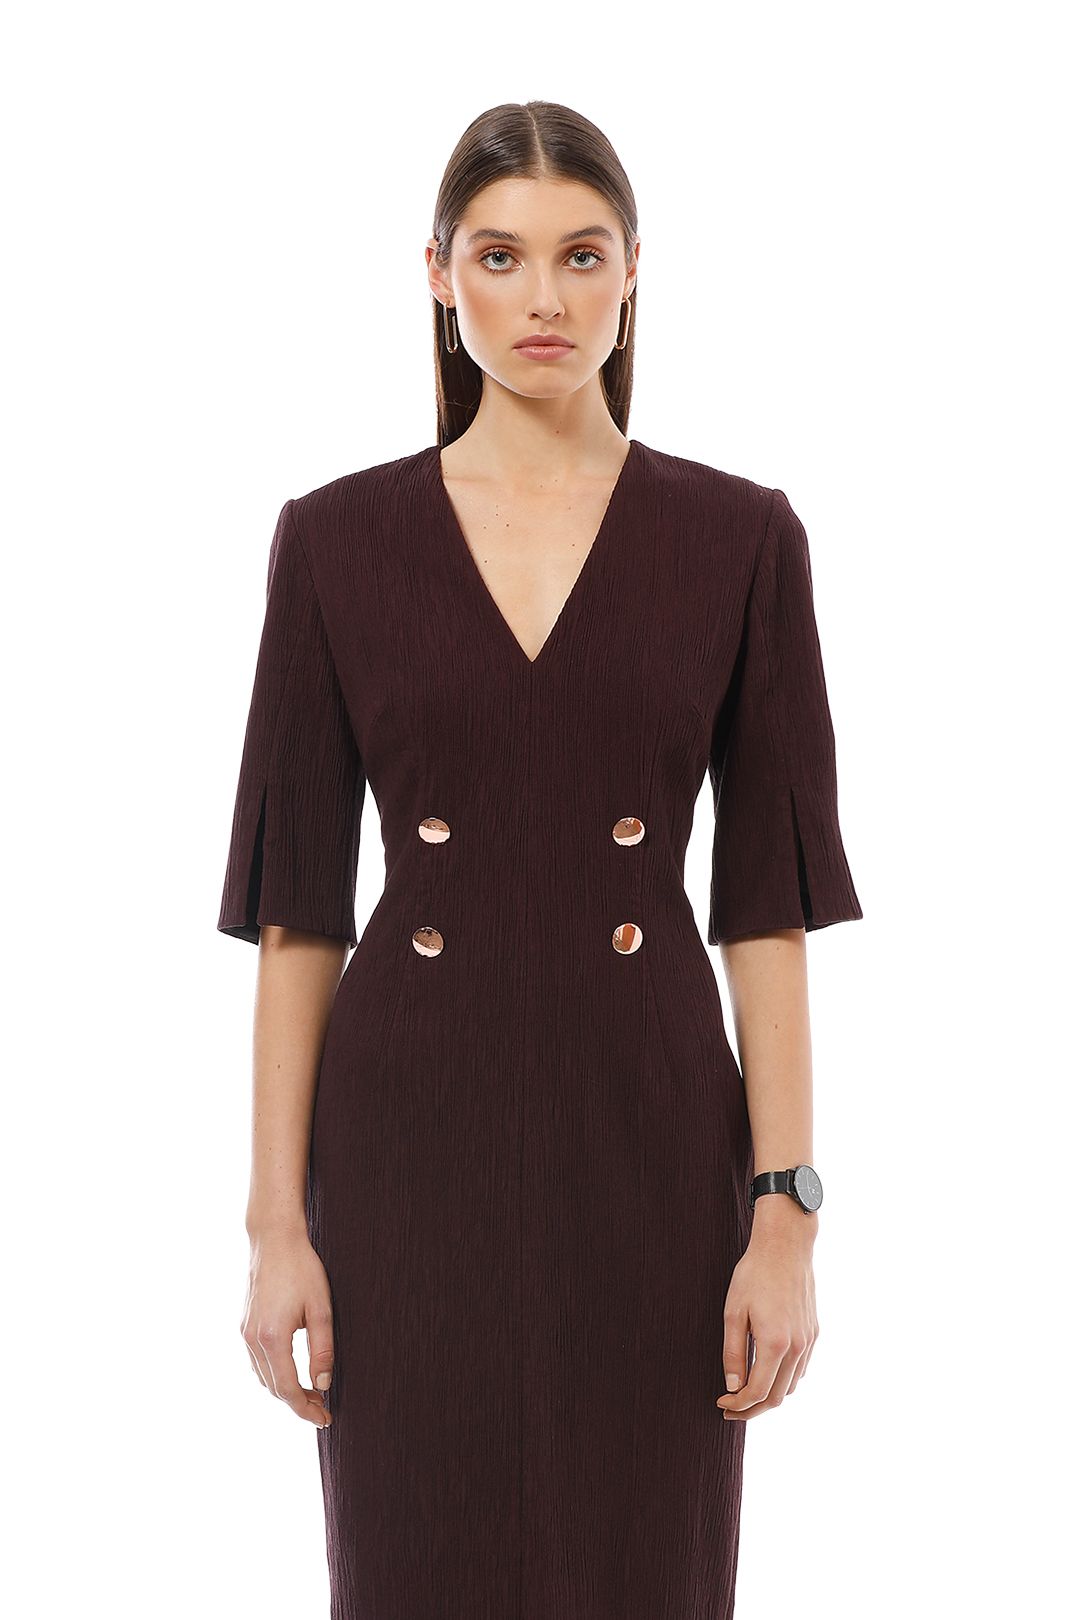 Ginger and Smart - Moduate Dress with Sleeve - Burgundy - Close Up